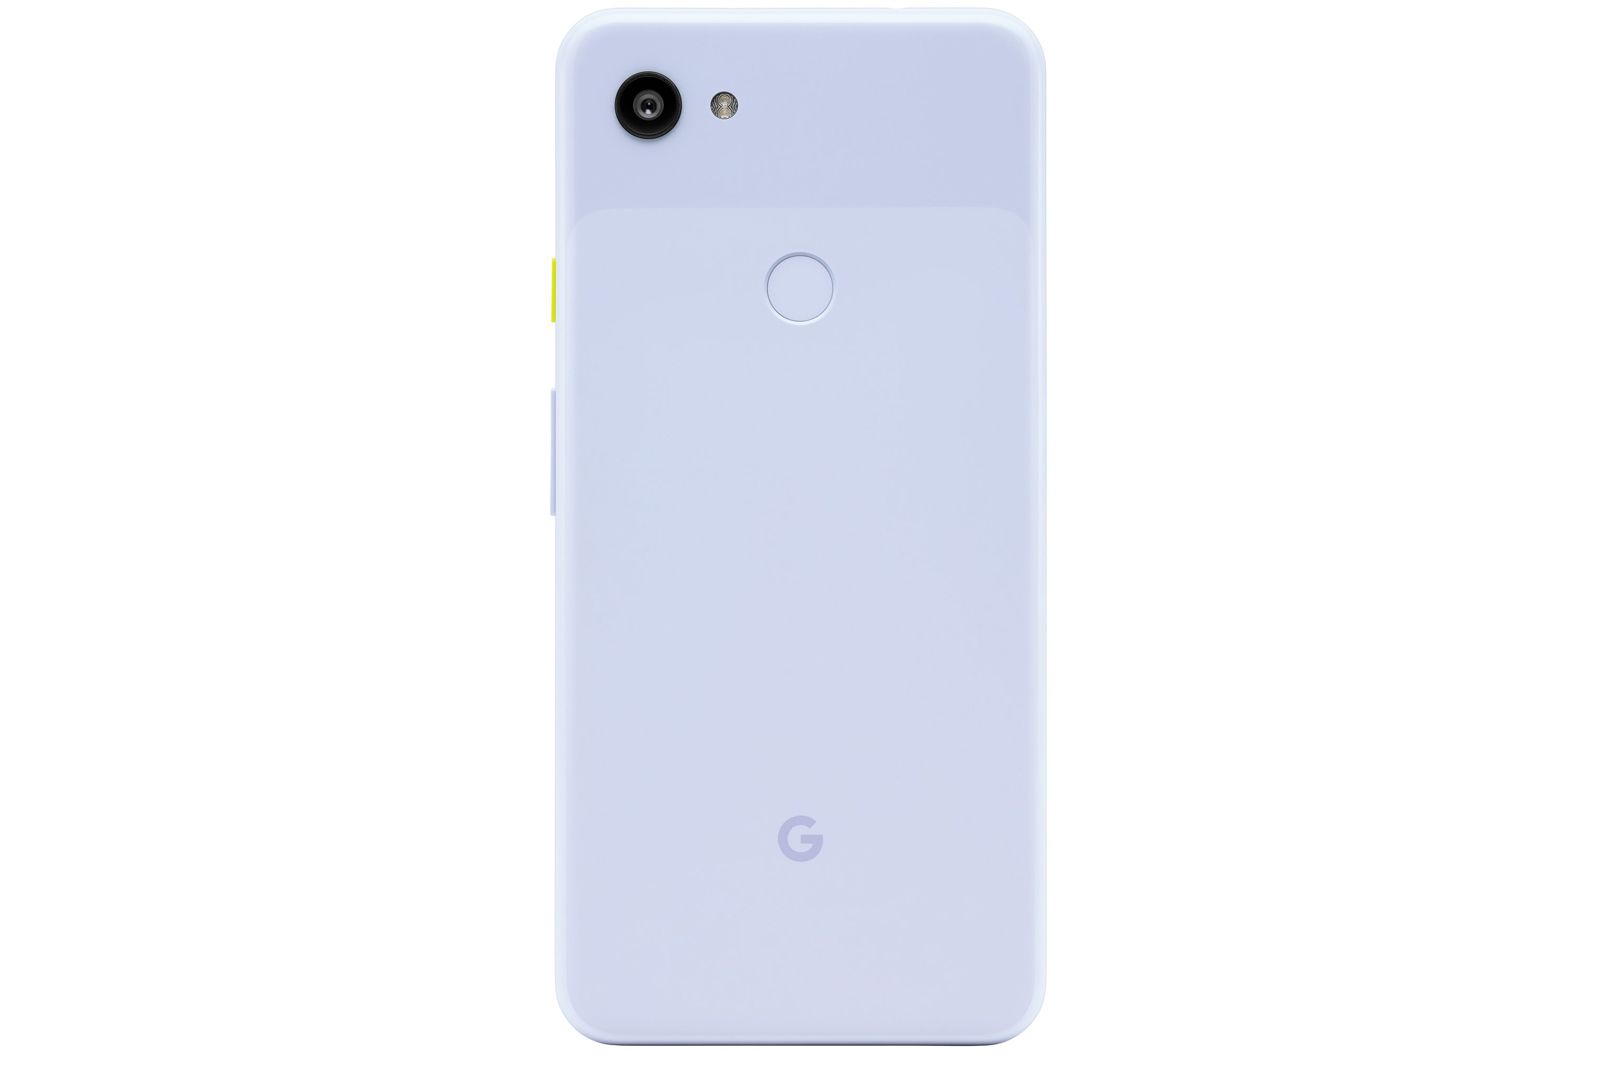 Google confirms new Pixel handset available on 8 May image 1